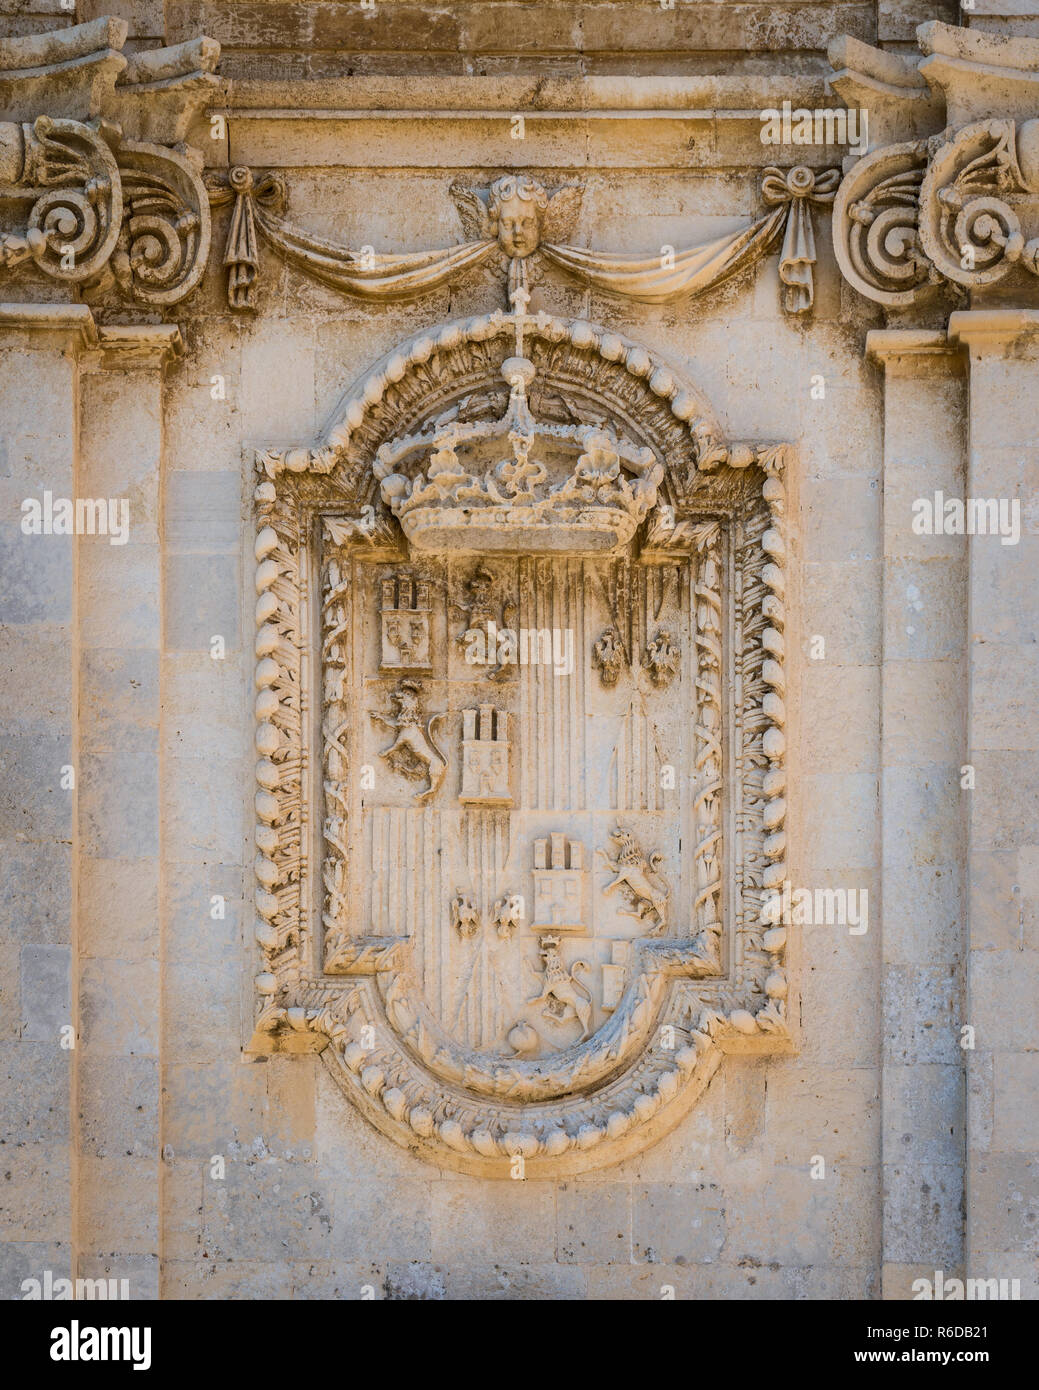 Detail from the facade of the Church of Santa Lucia alla Badia in Siracusa old town (Ortigia). Sicily, southern Italy. Stock Photo